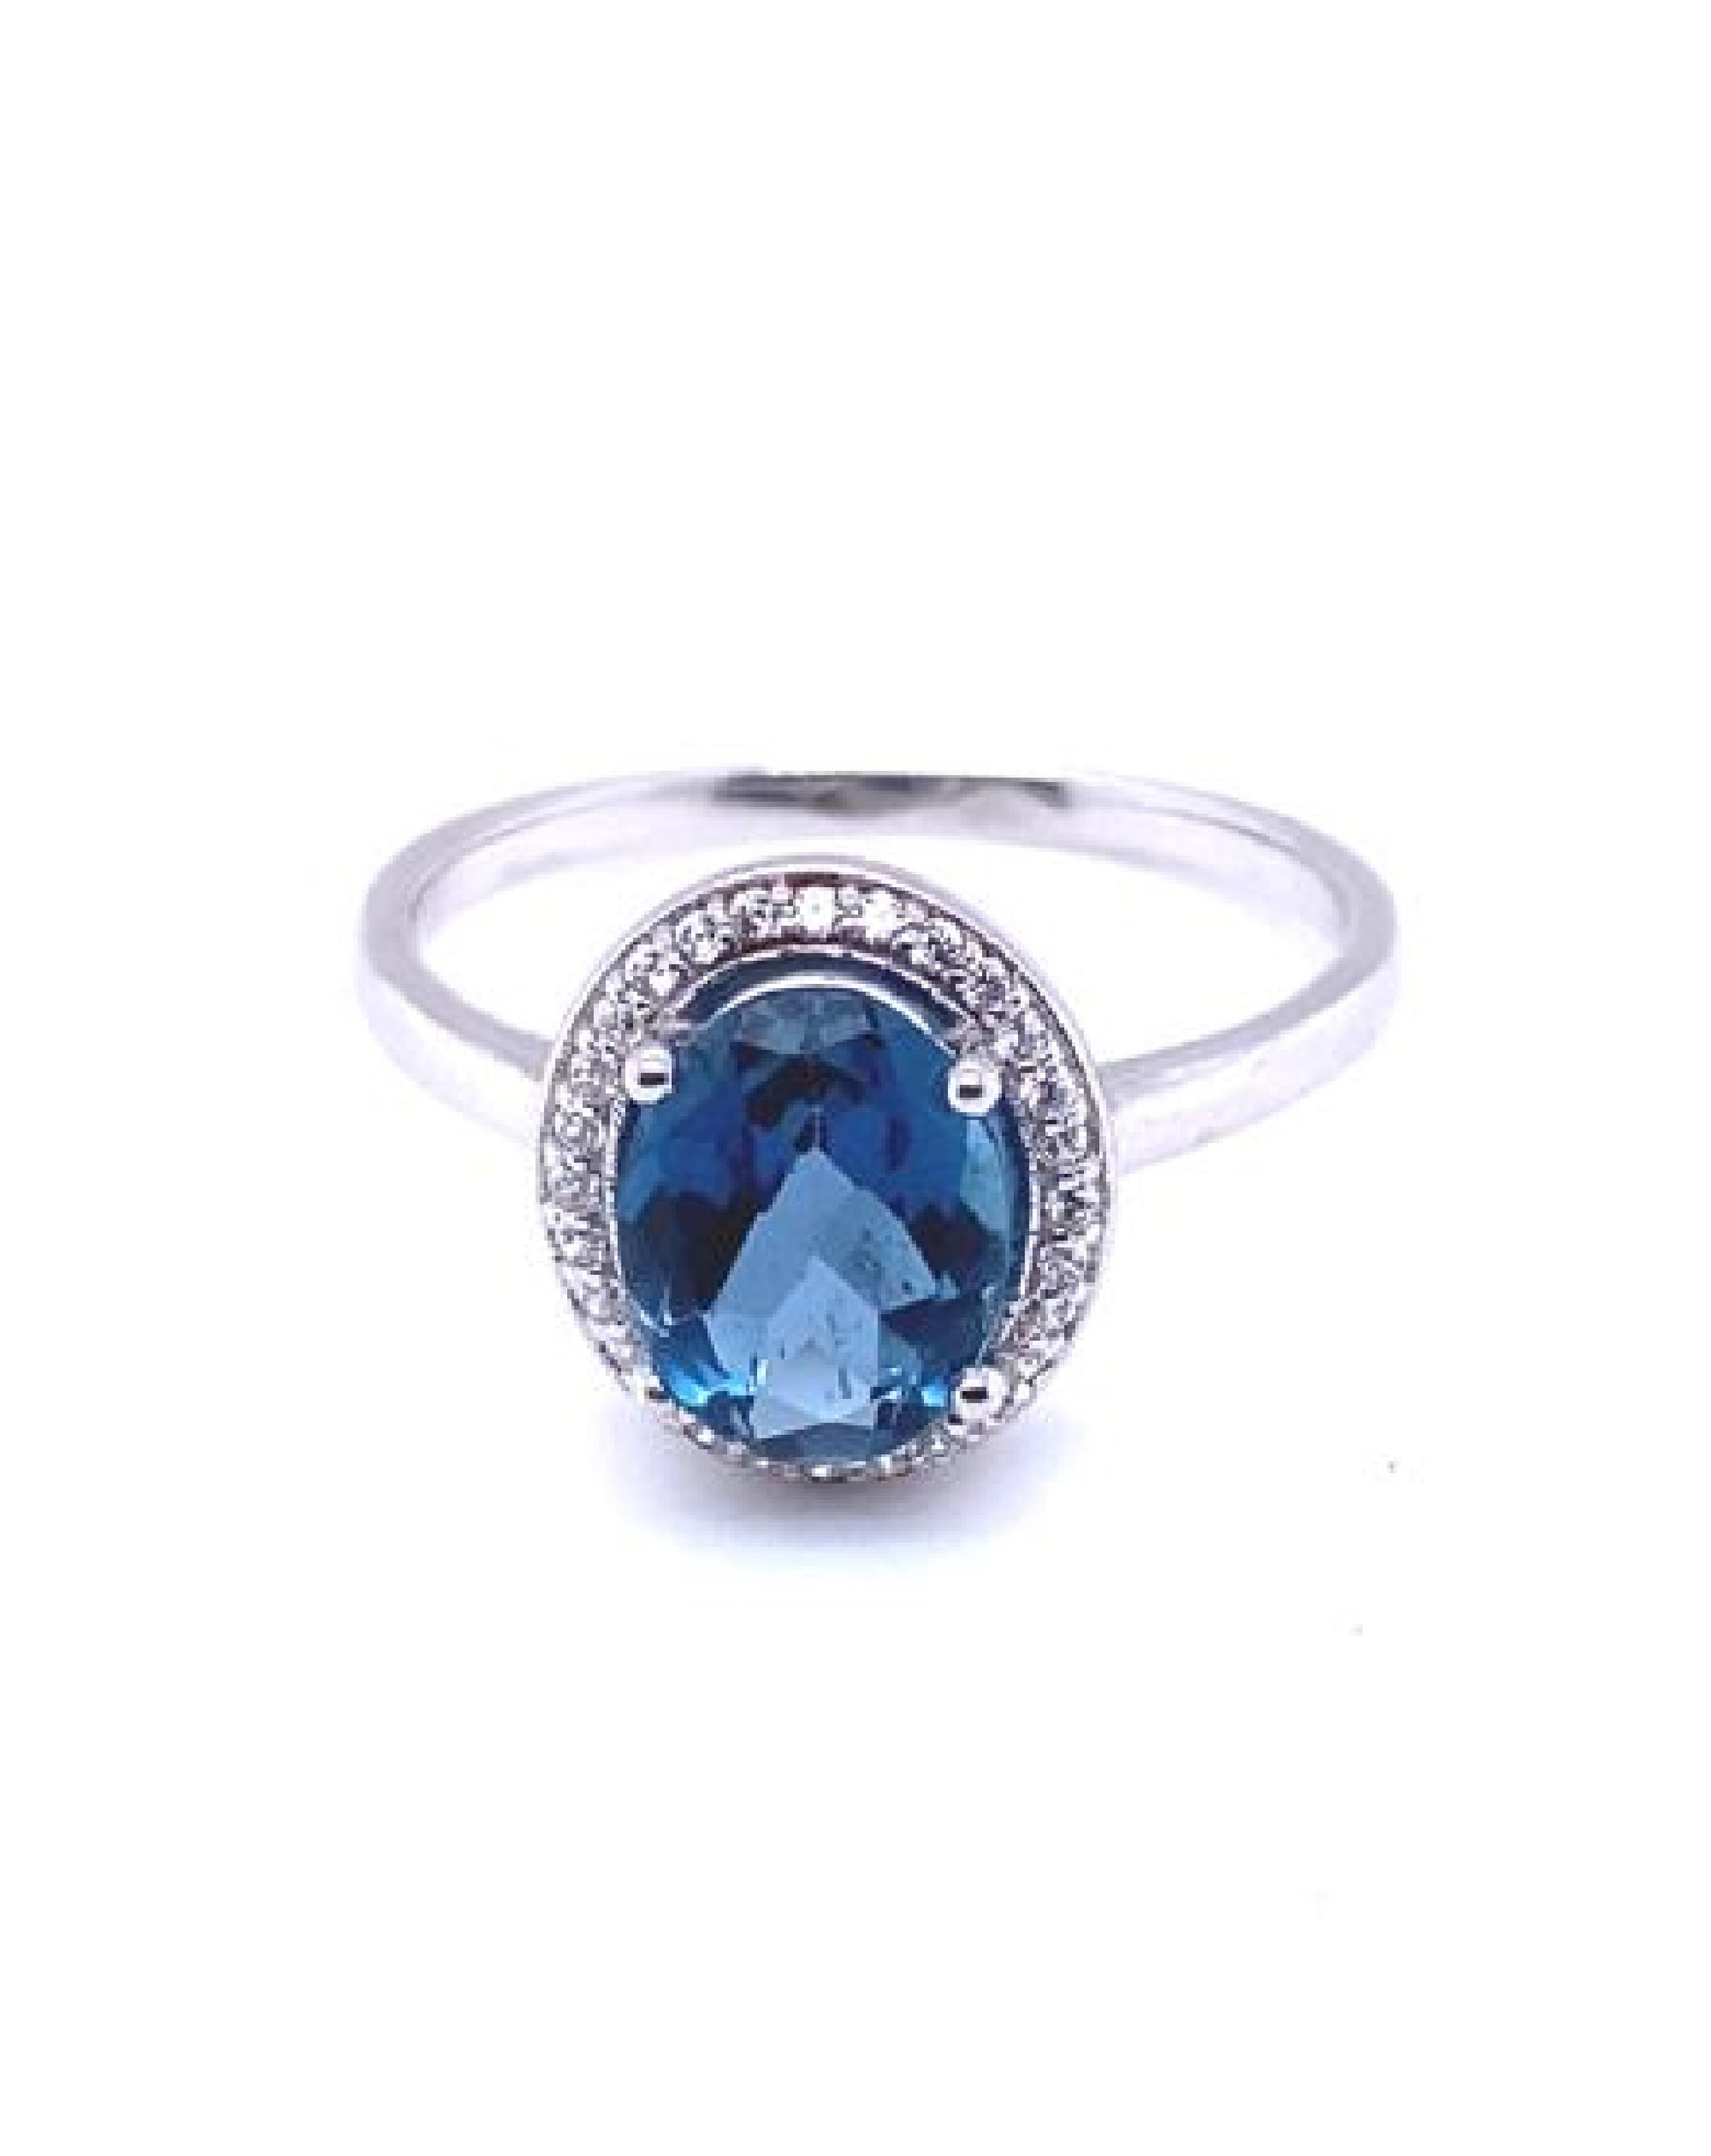 Gold 18 kt White Gold White & Blue Sapphires Ring Jewelry